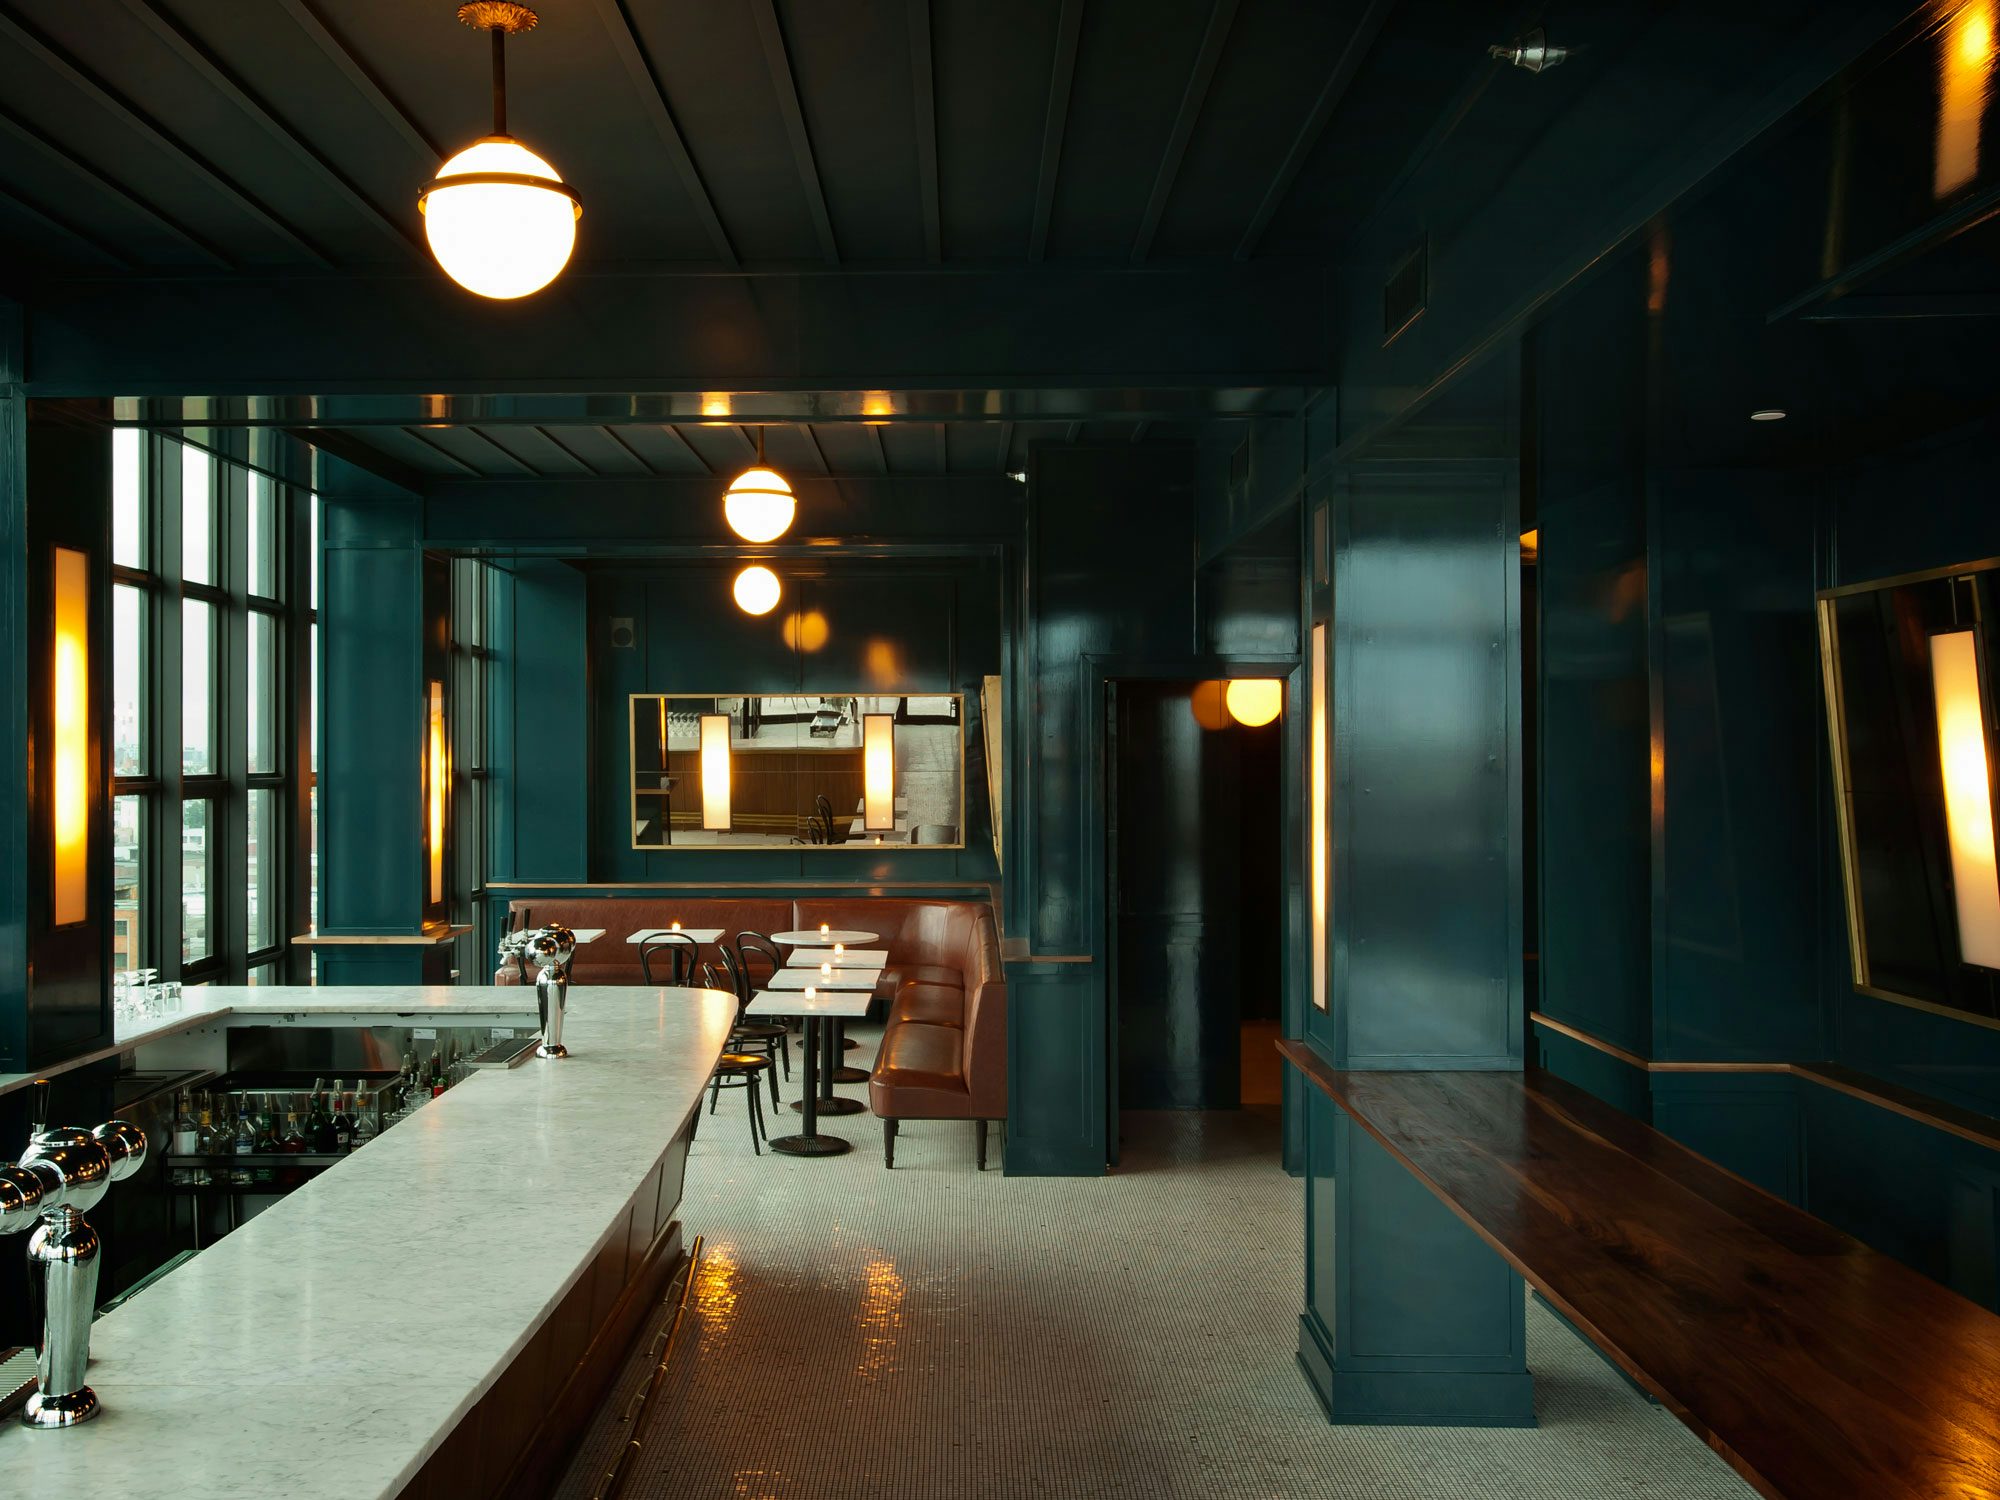 gallery image for The Wythe Hotel Lobby